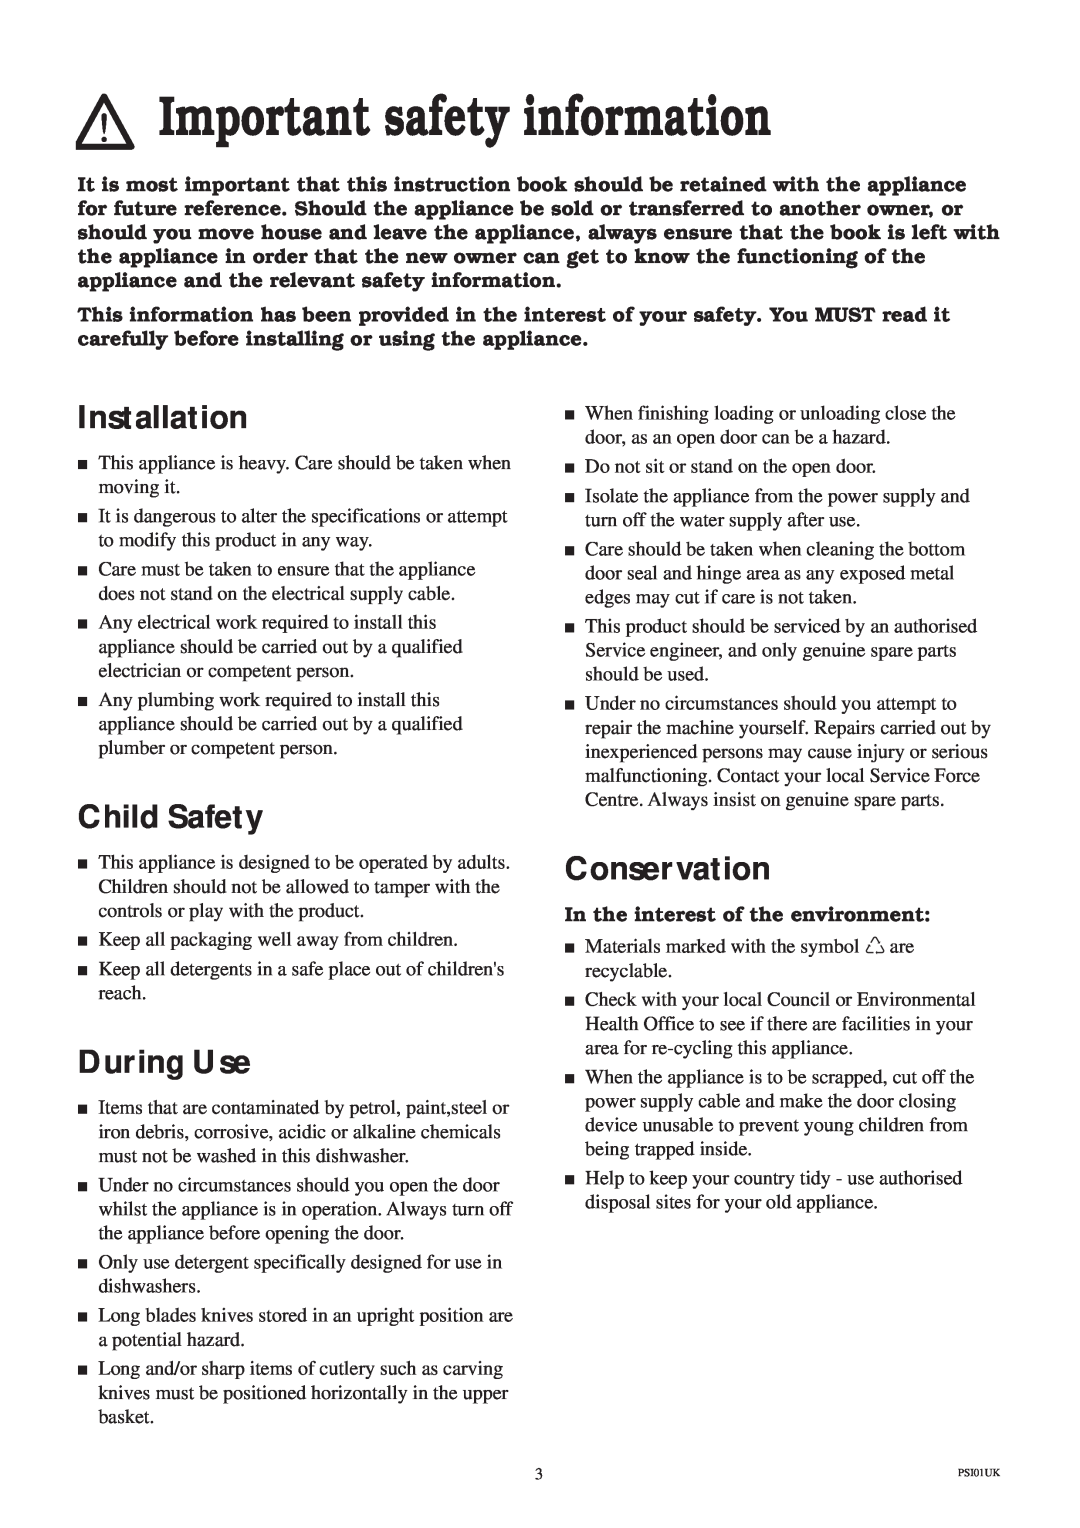 Zanussi ZDS 689 EX manual Important safety information, Installation, Child Safety, During Use, Conservation 